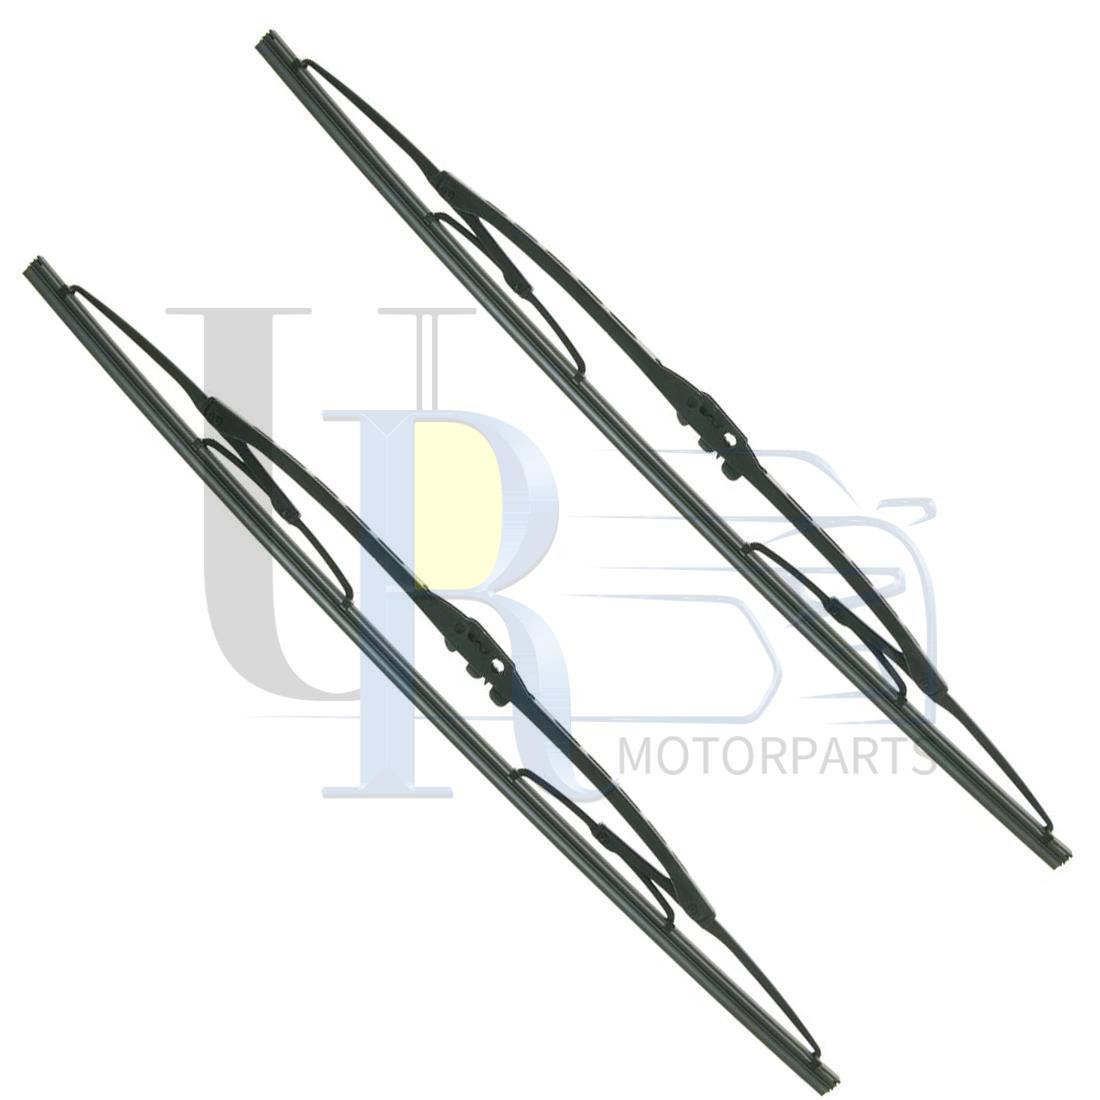 ANCO 2pcs Front Windshield Wiper Blade for Bentley Arnage 1999-2007 2008 2009